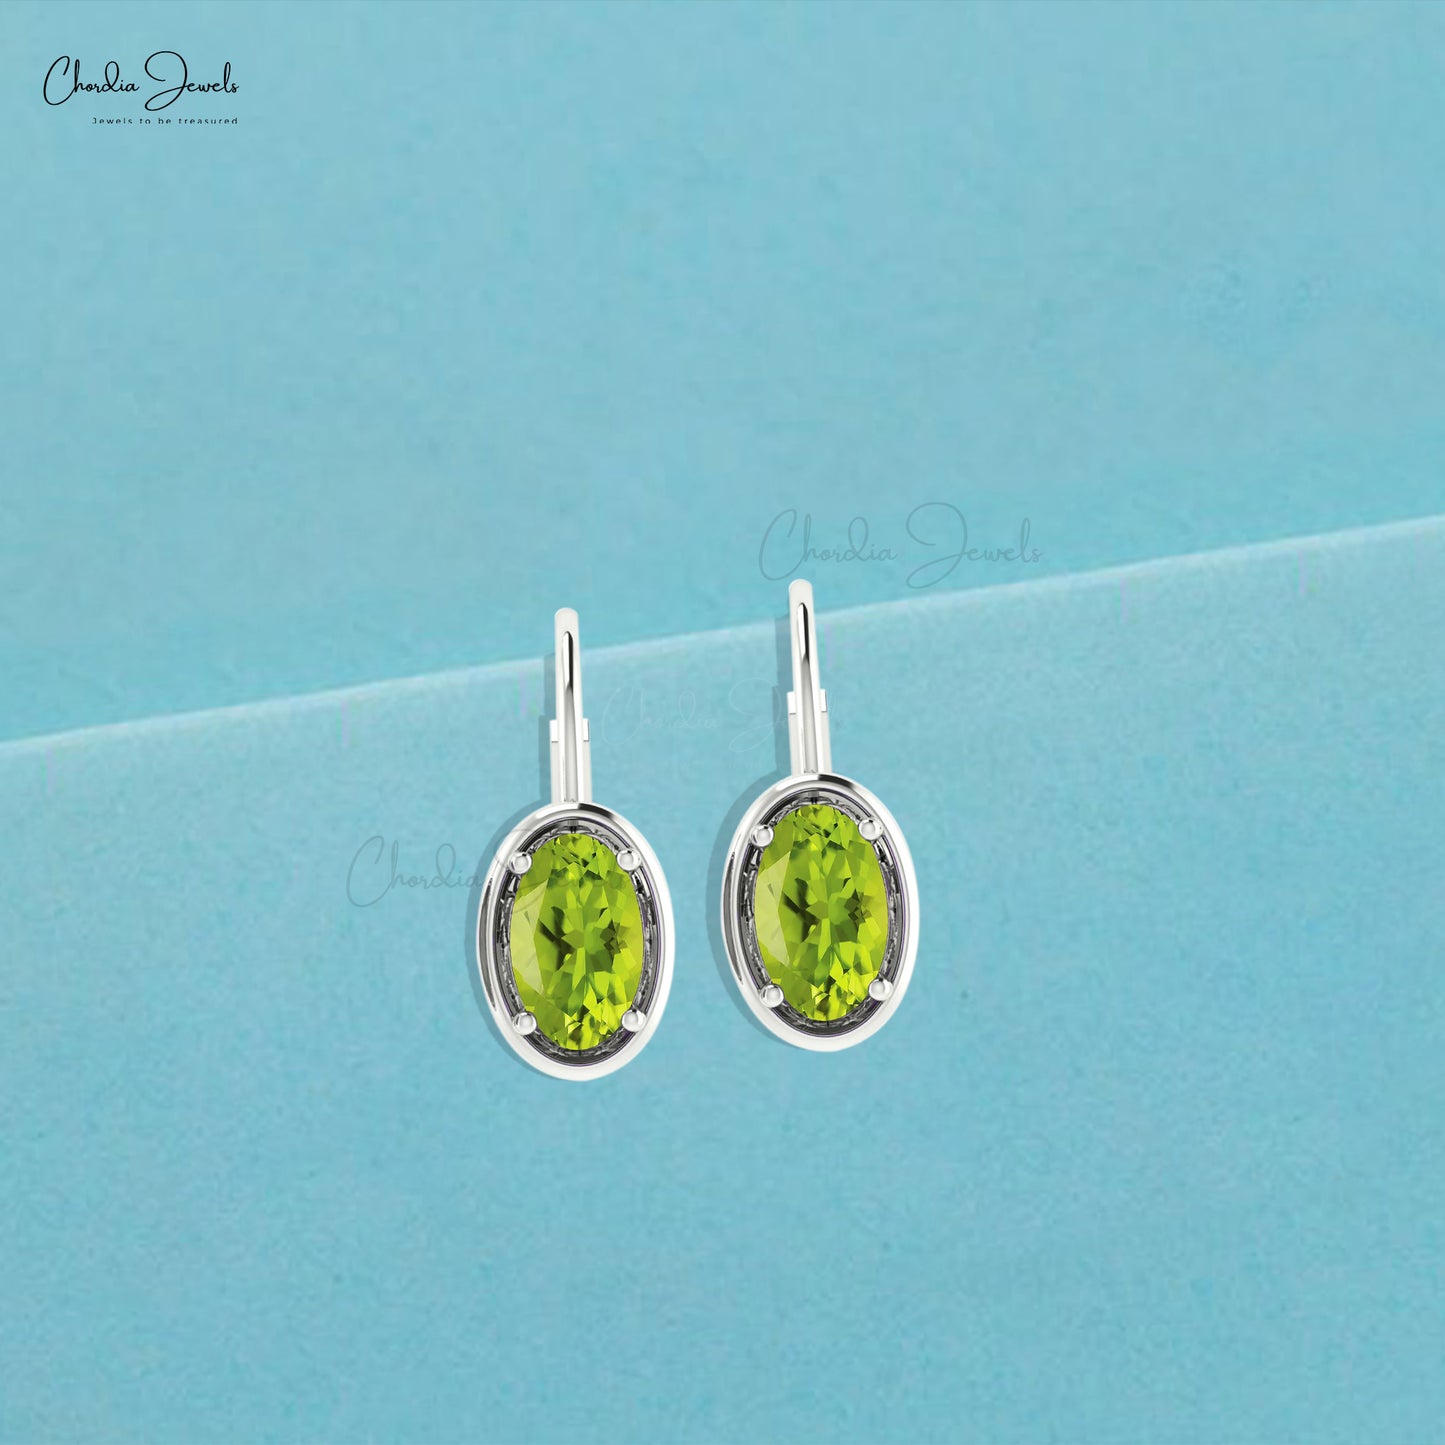 Real 14k Gold Natural Peridot Lever Back Earrings 7x5mm Oval Cut Gemstone Prong Set Handmade Earrings For Valentine's Day Gift